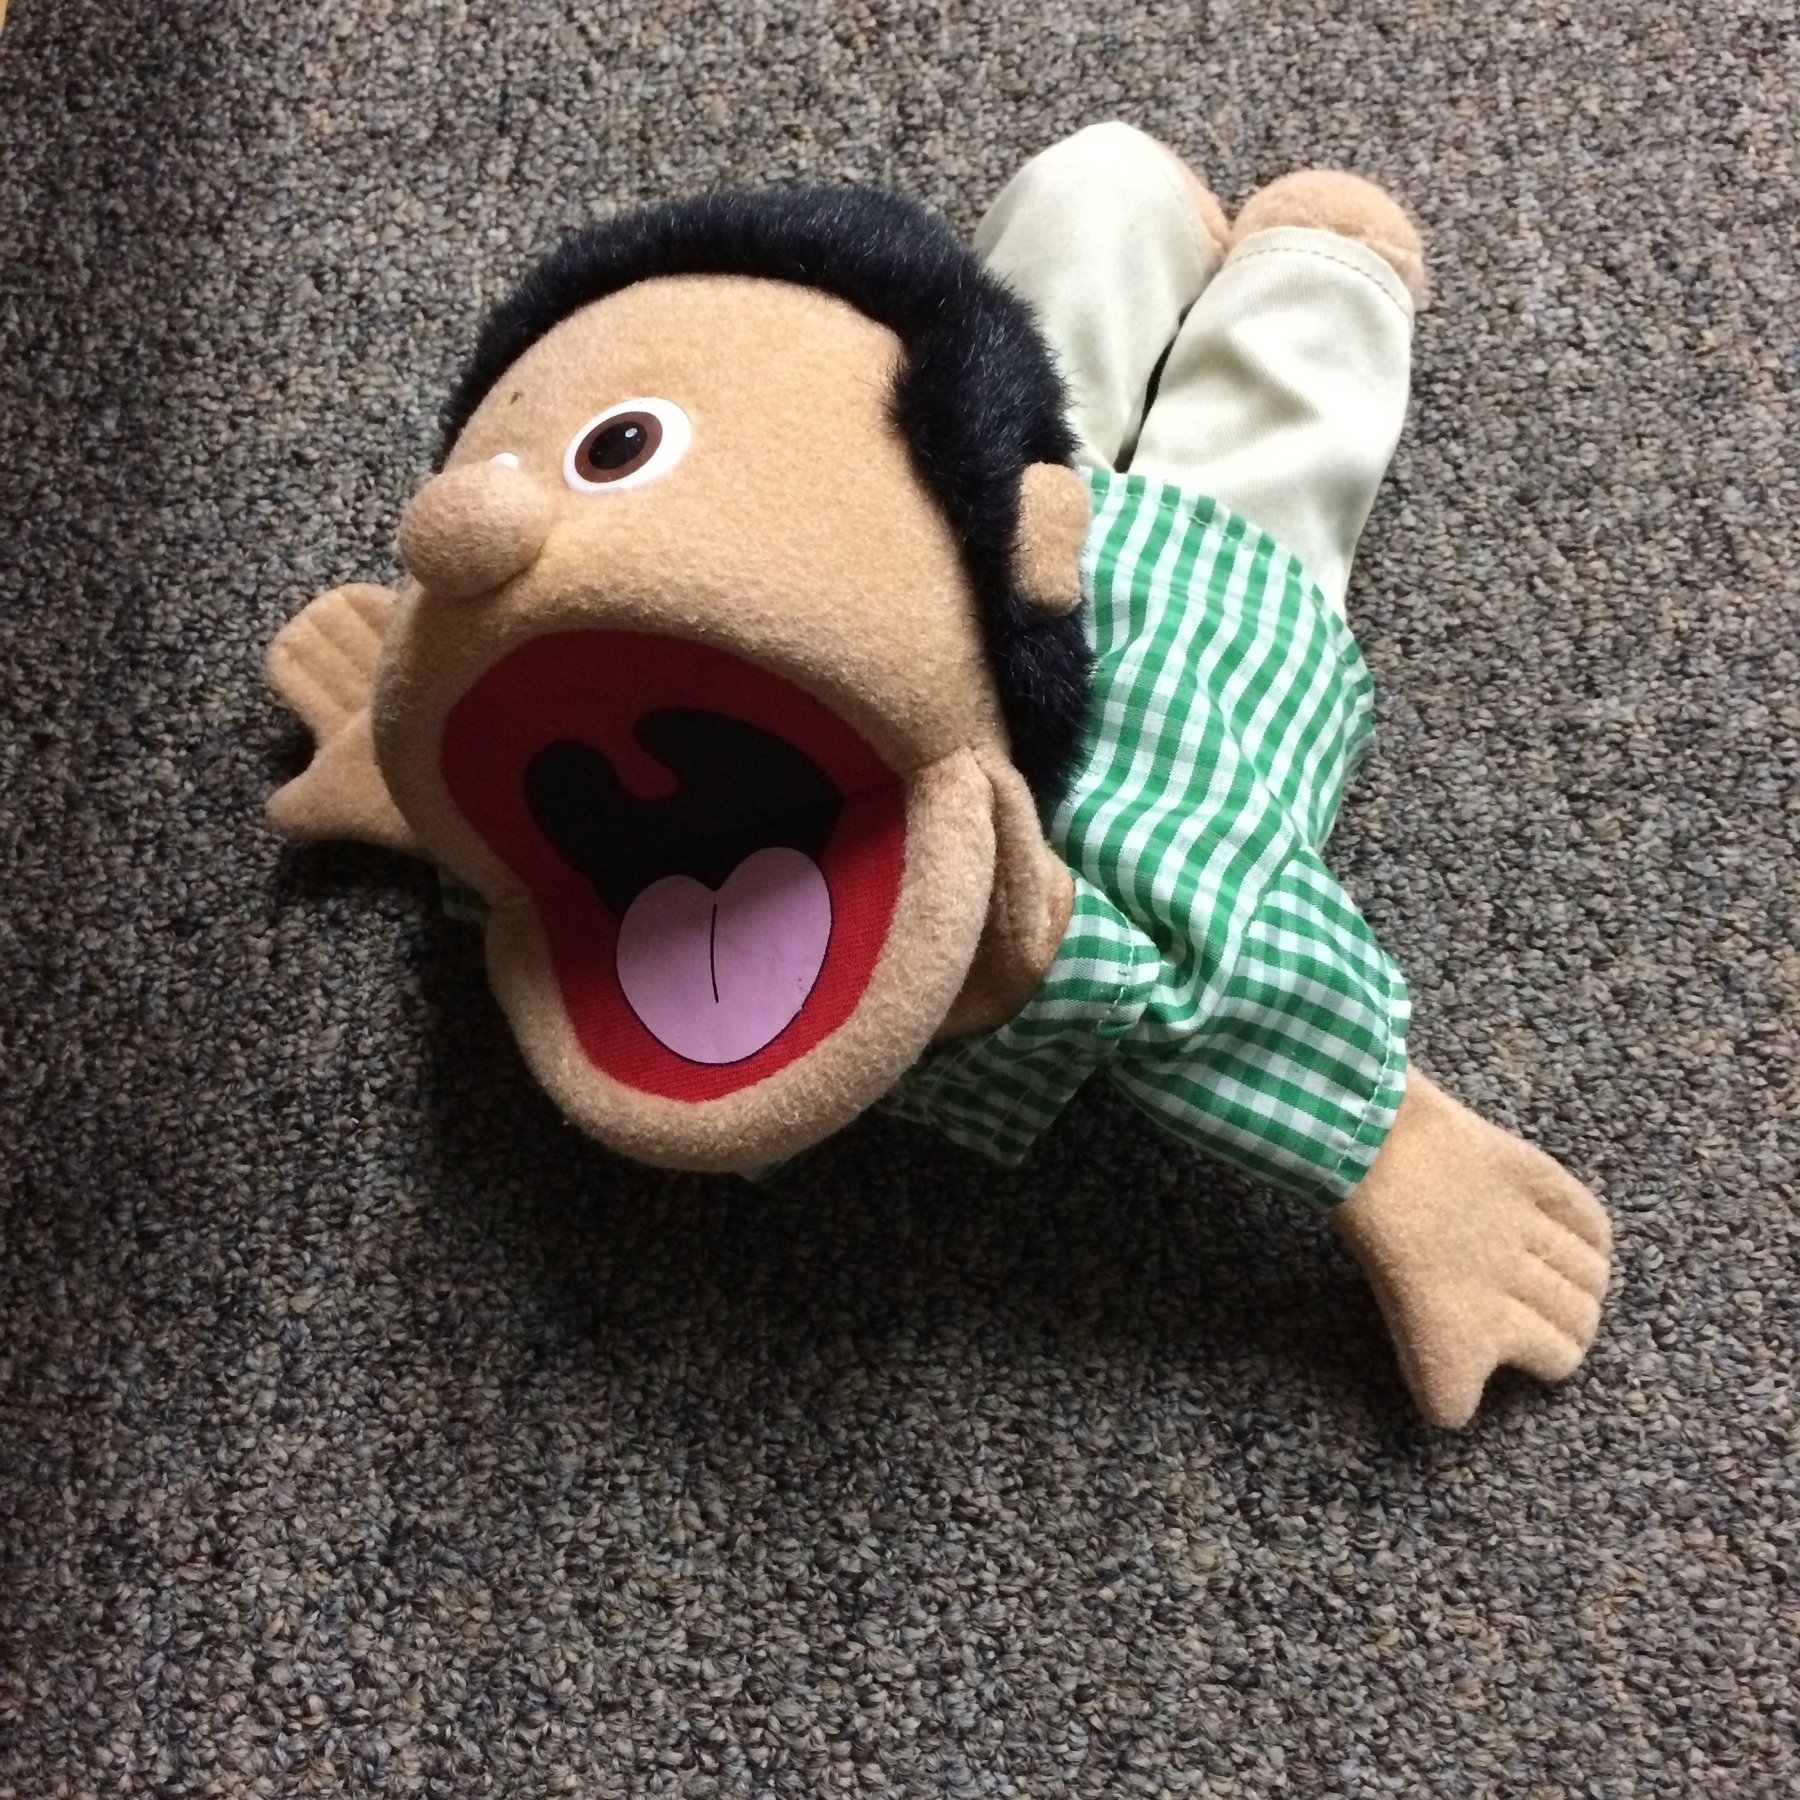 A Muppet-like man in a push-up position with his mouth wide open.